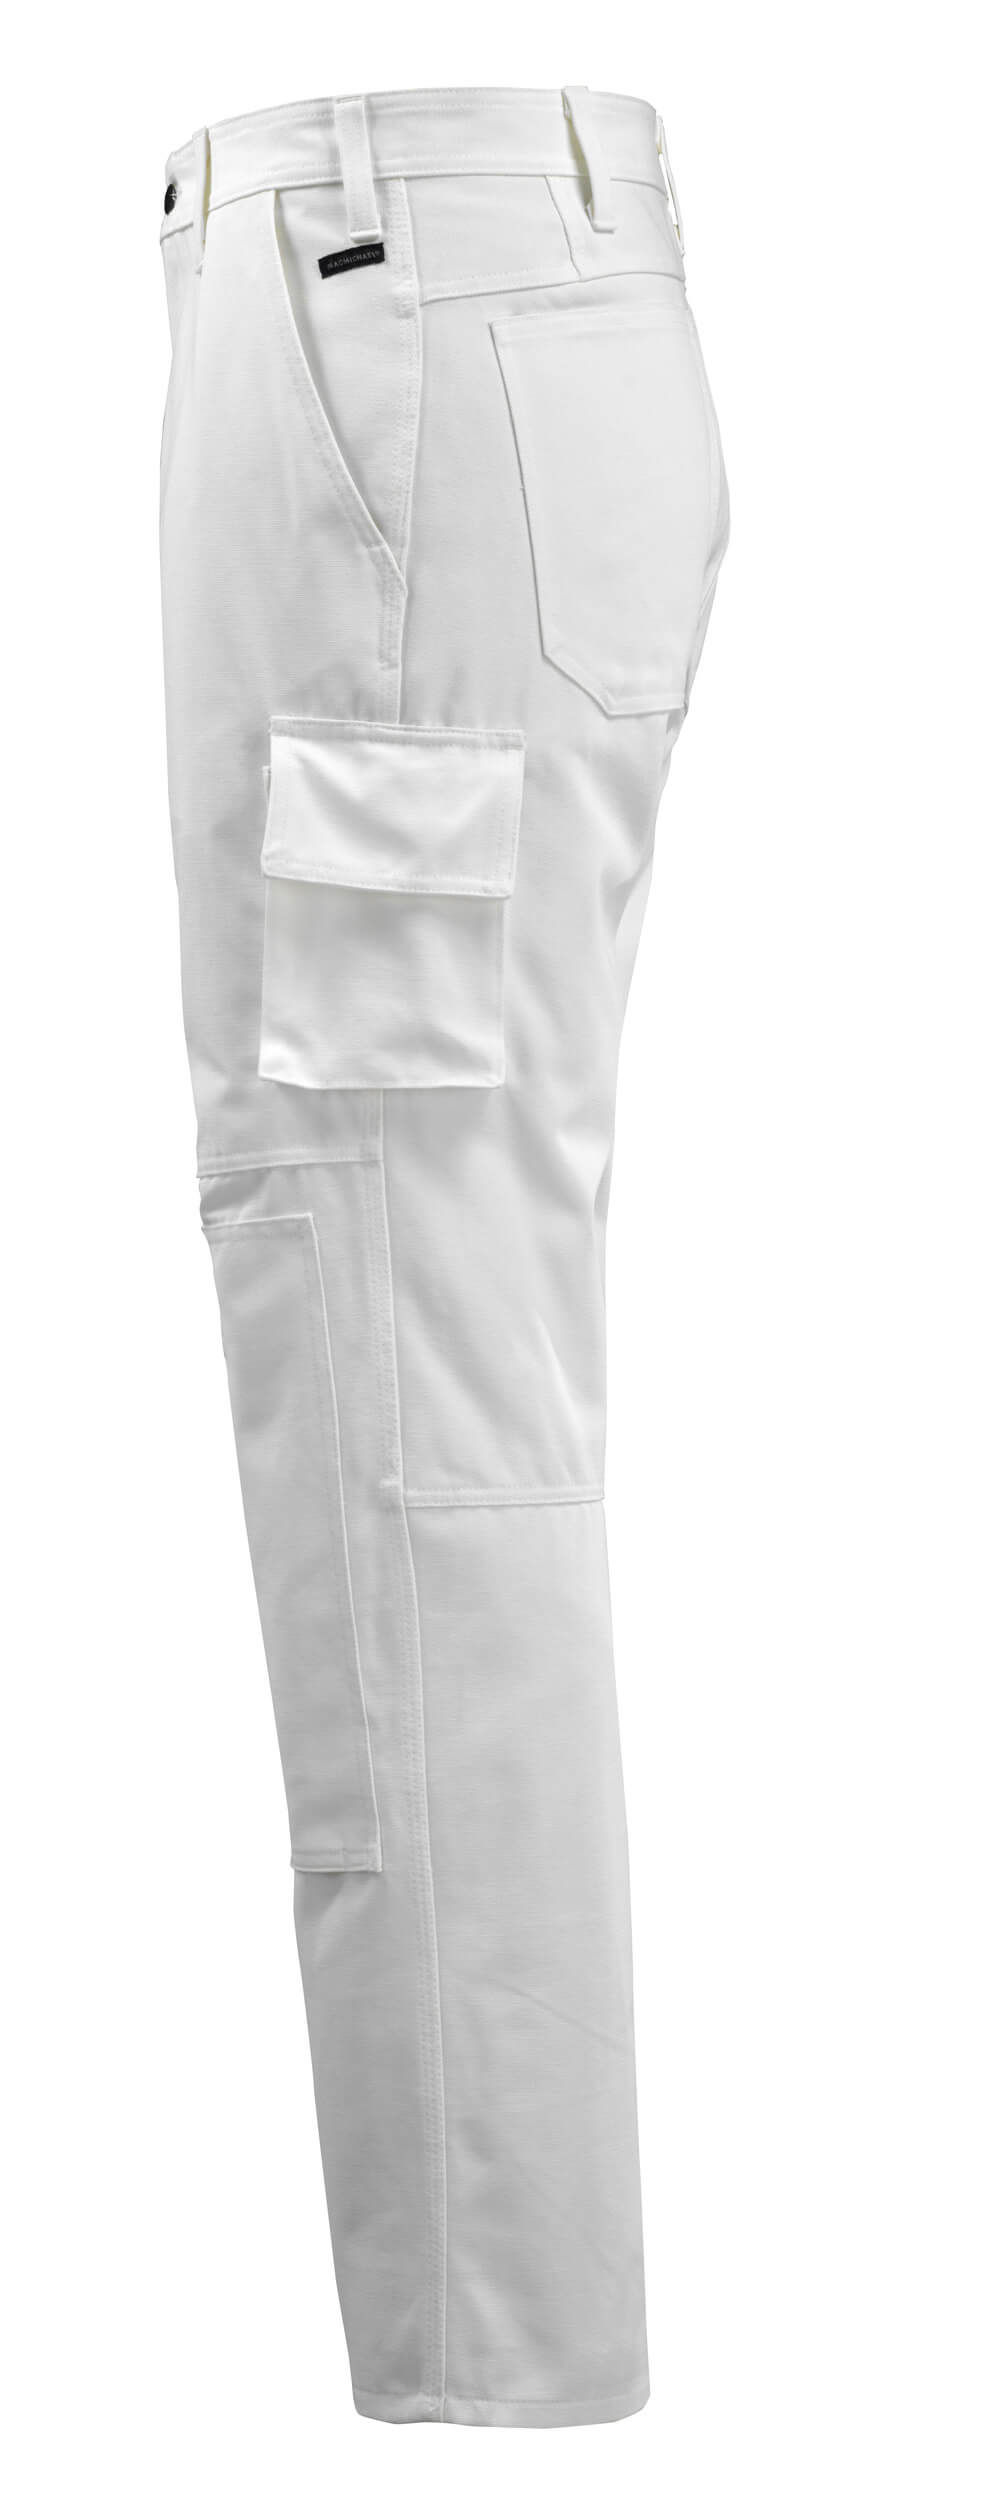 MACMICHAEL WORKWEAR Trousers with kneepad pockets 14579